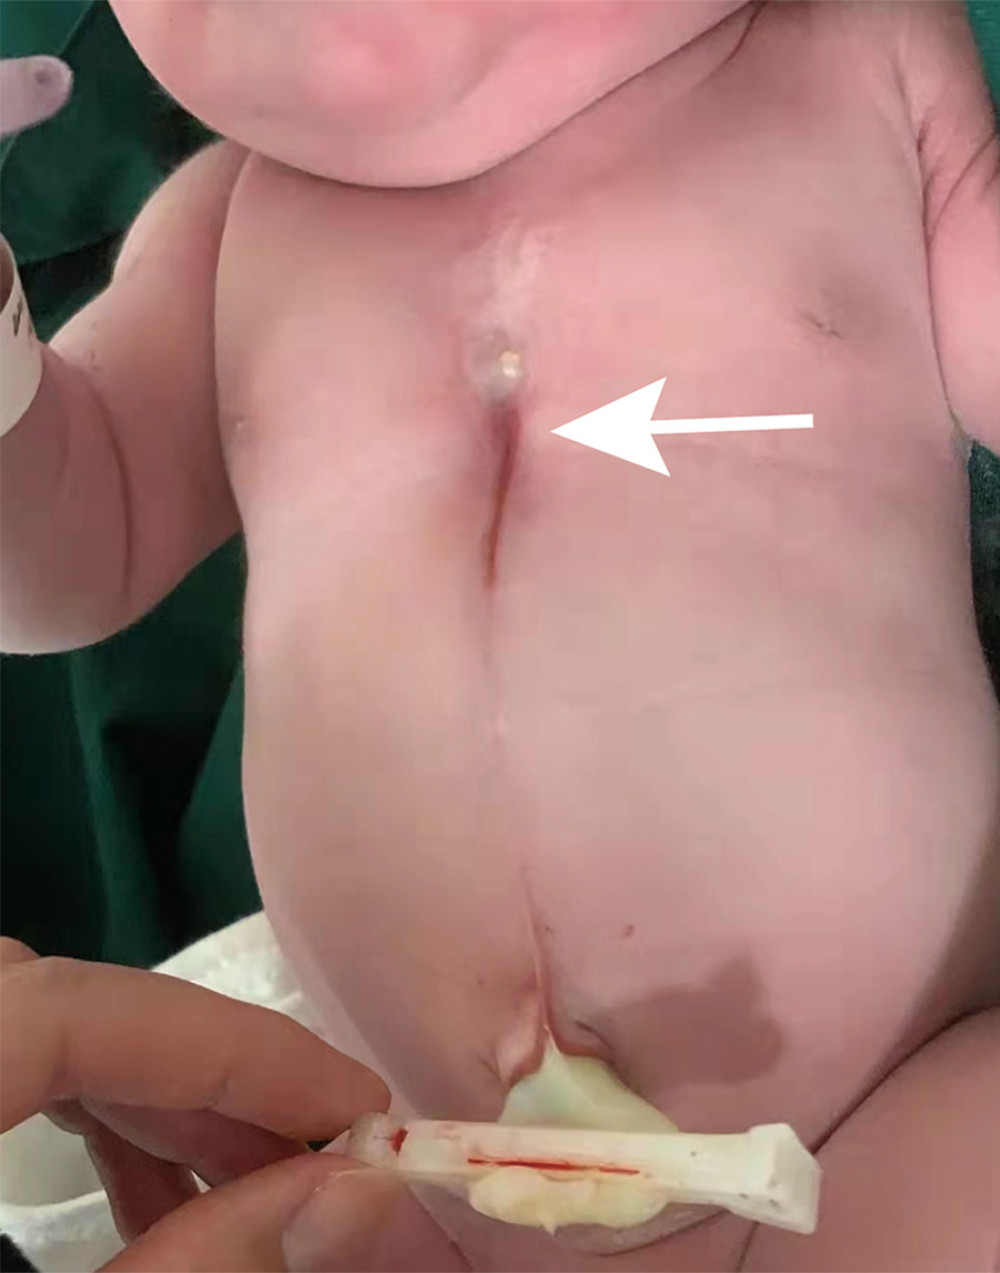 A newborn girl with an isolated congenital superior sternal cleft in the middle of the chest and extended to the root of the umbilical cord.